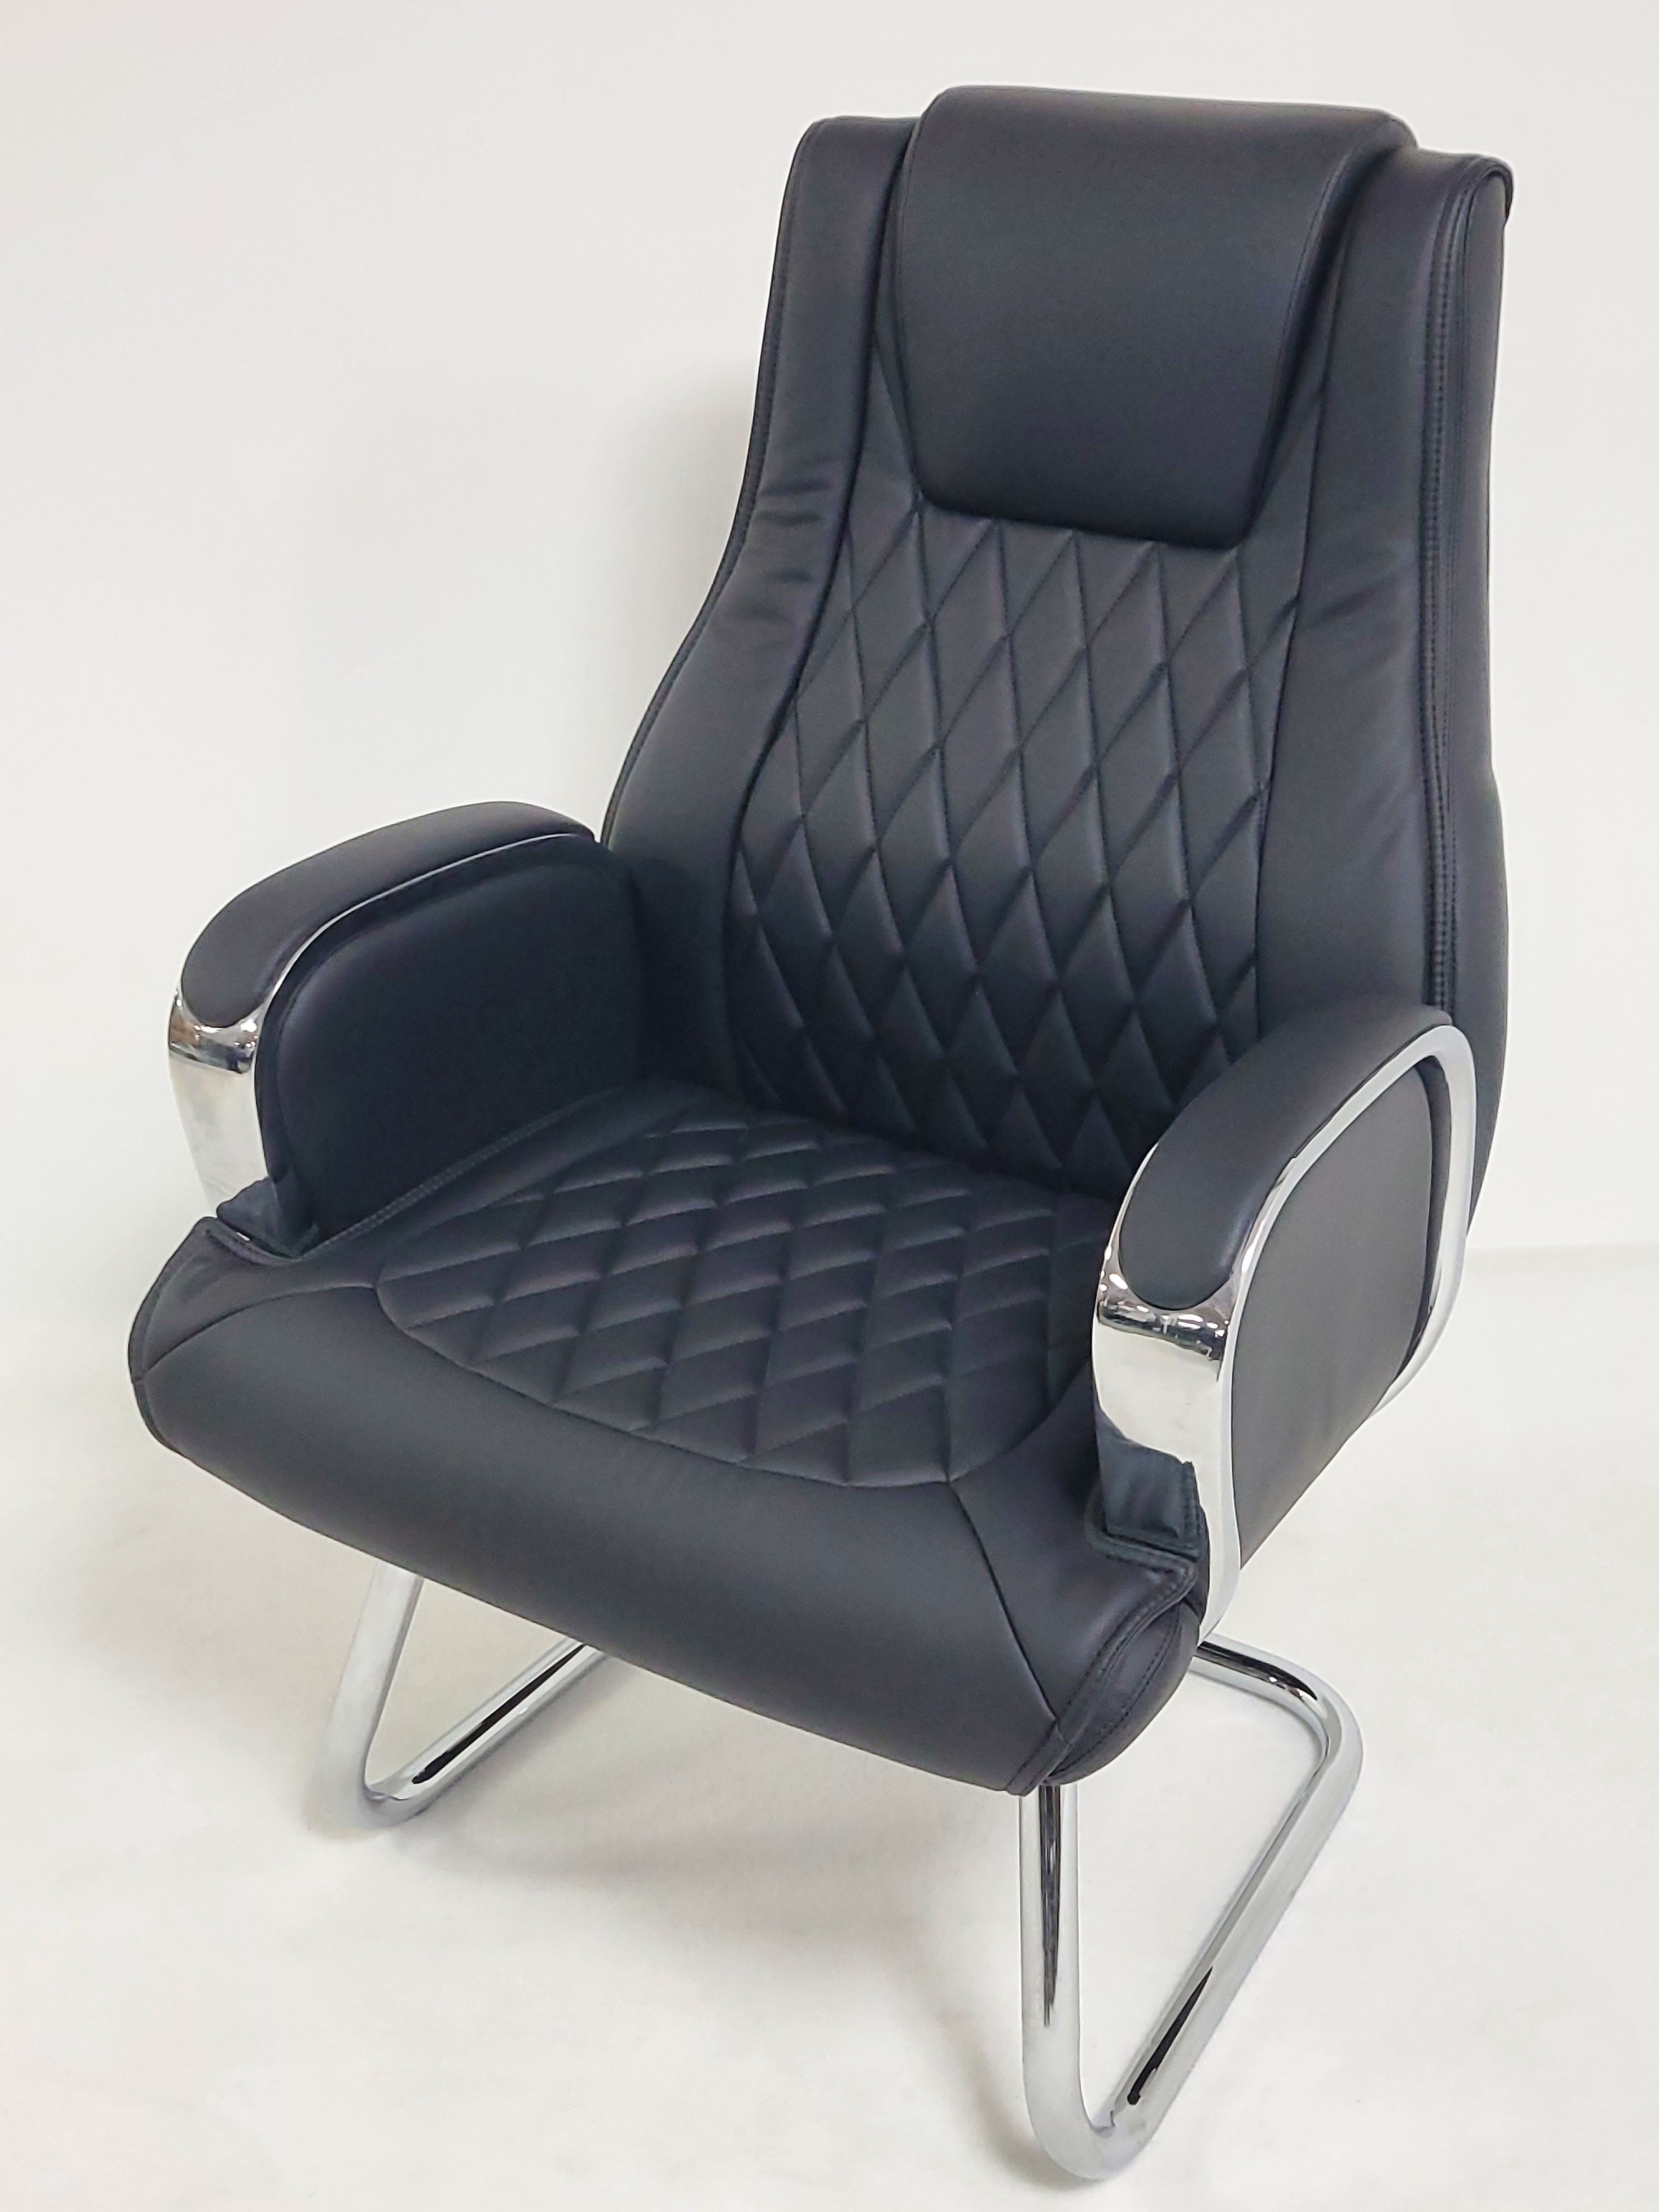 Heavy Duty Modern Black Leather Visitor Chair with Chrome Arms - CHA-1202C North Yorkshire